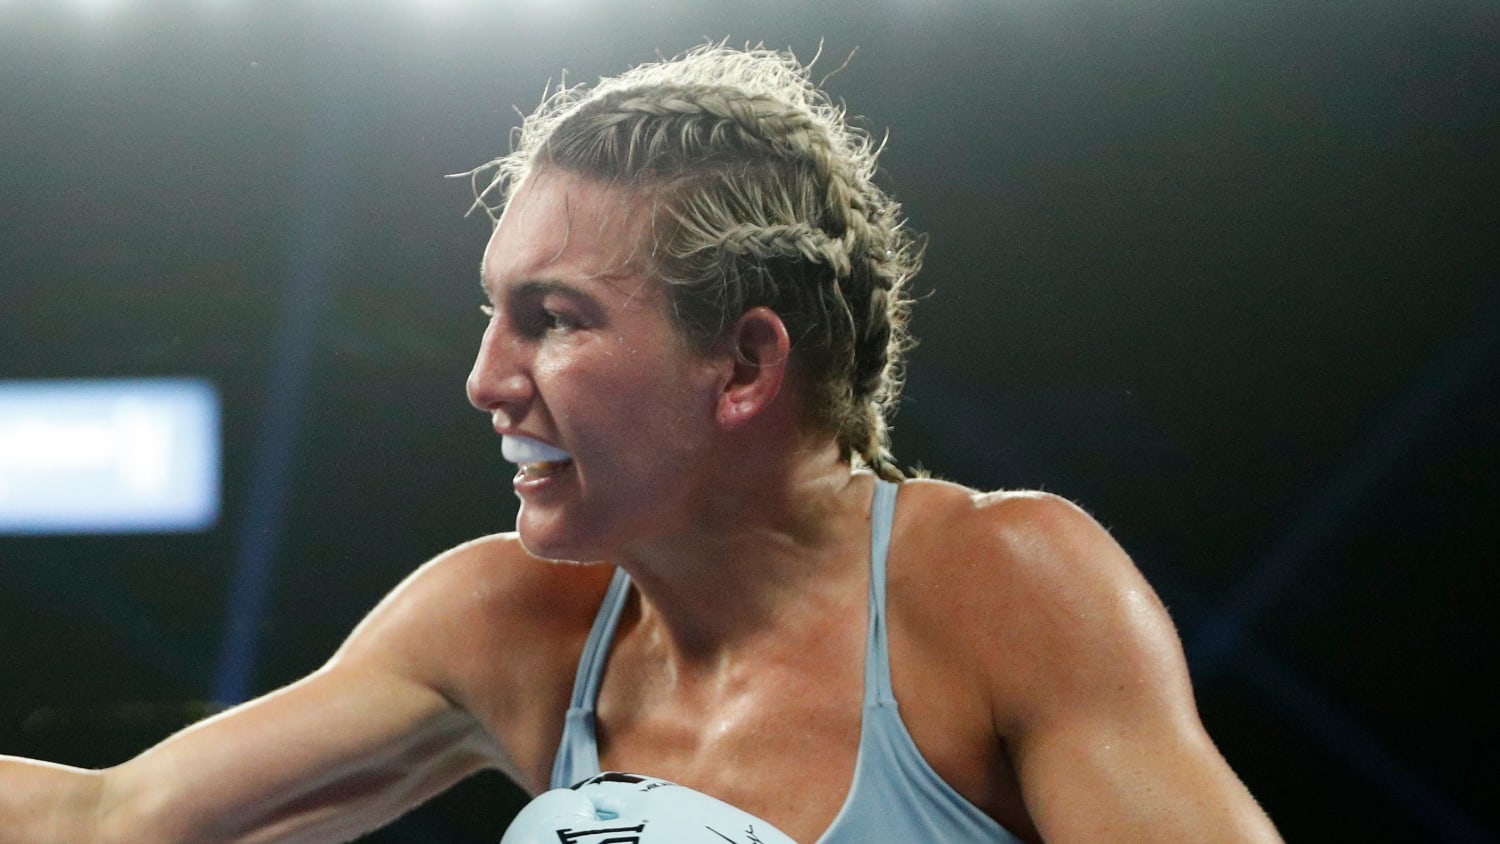 Junior lightweight boxing contender Mikaela Mayer pulls out of Las Vegas fight after positive COVID-19 test